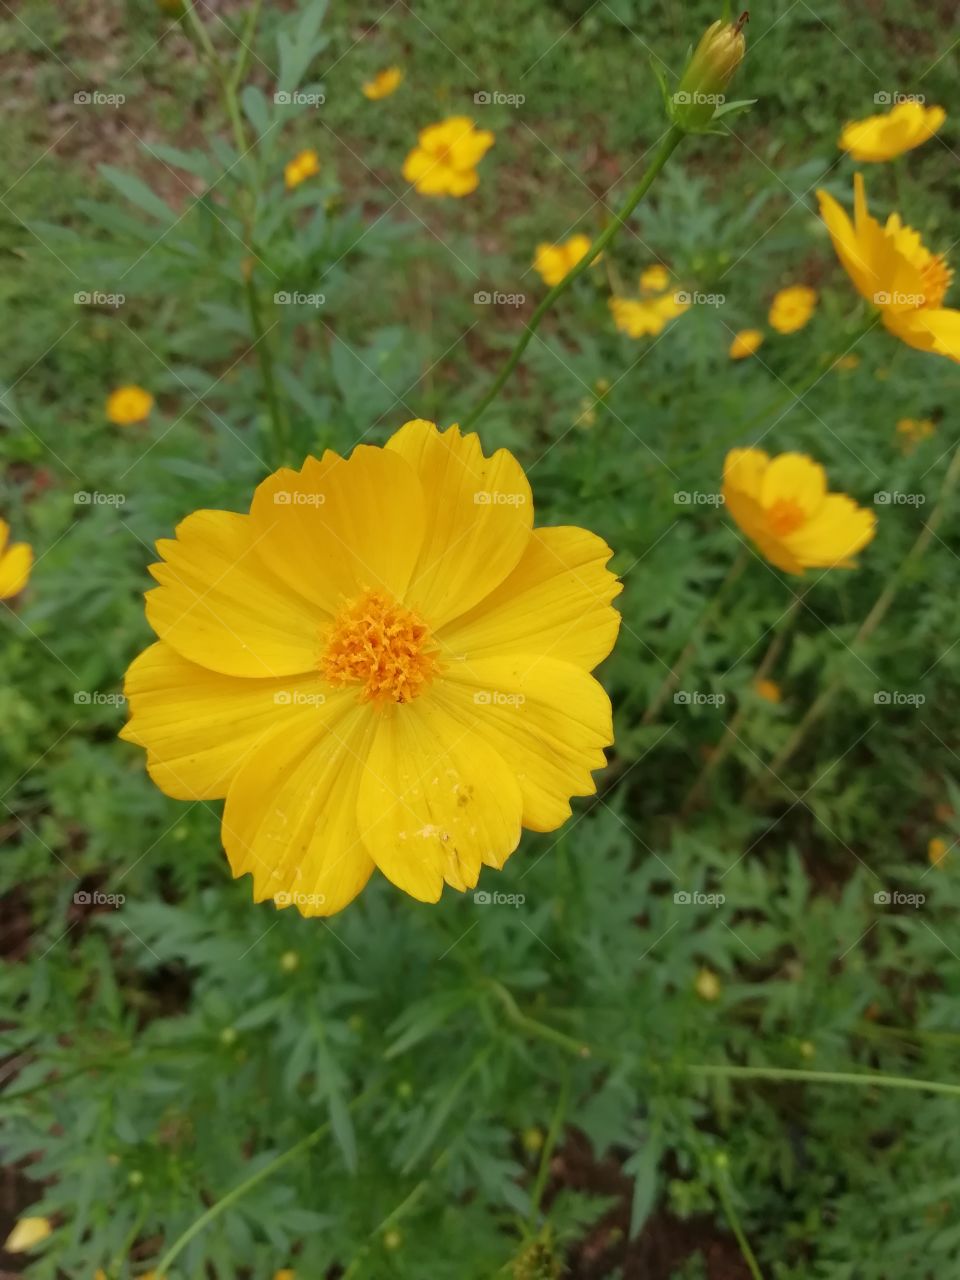 The Yellow beauty